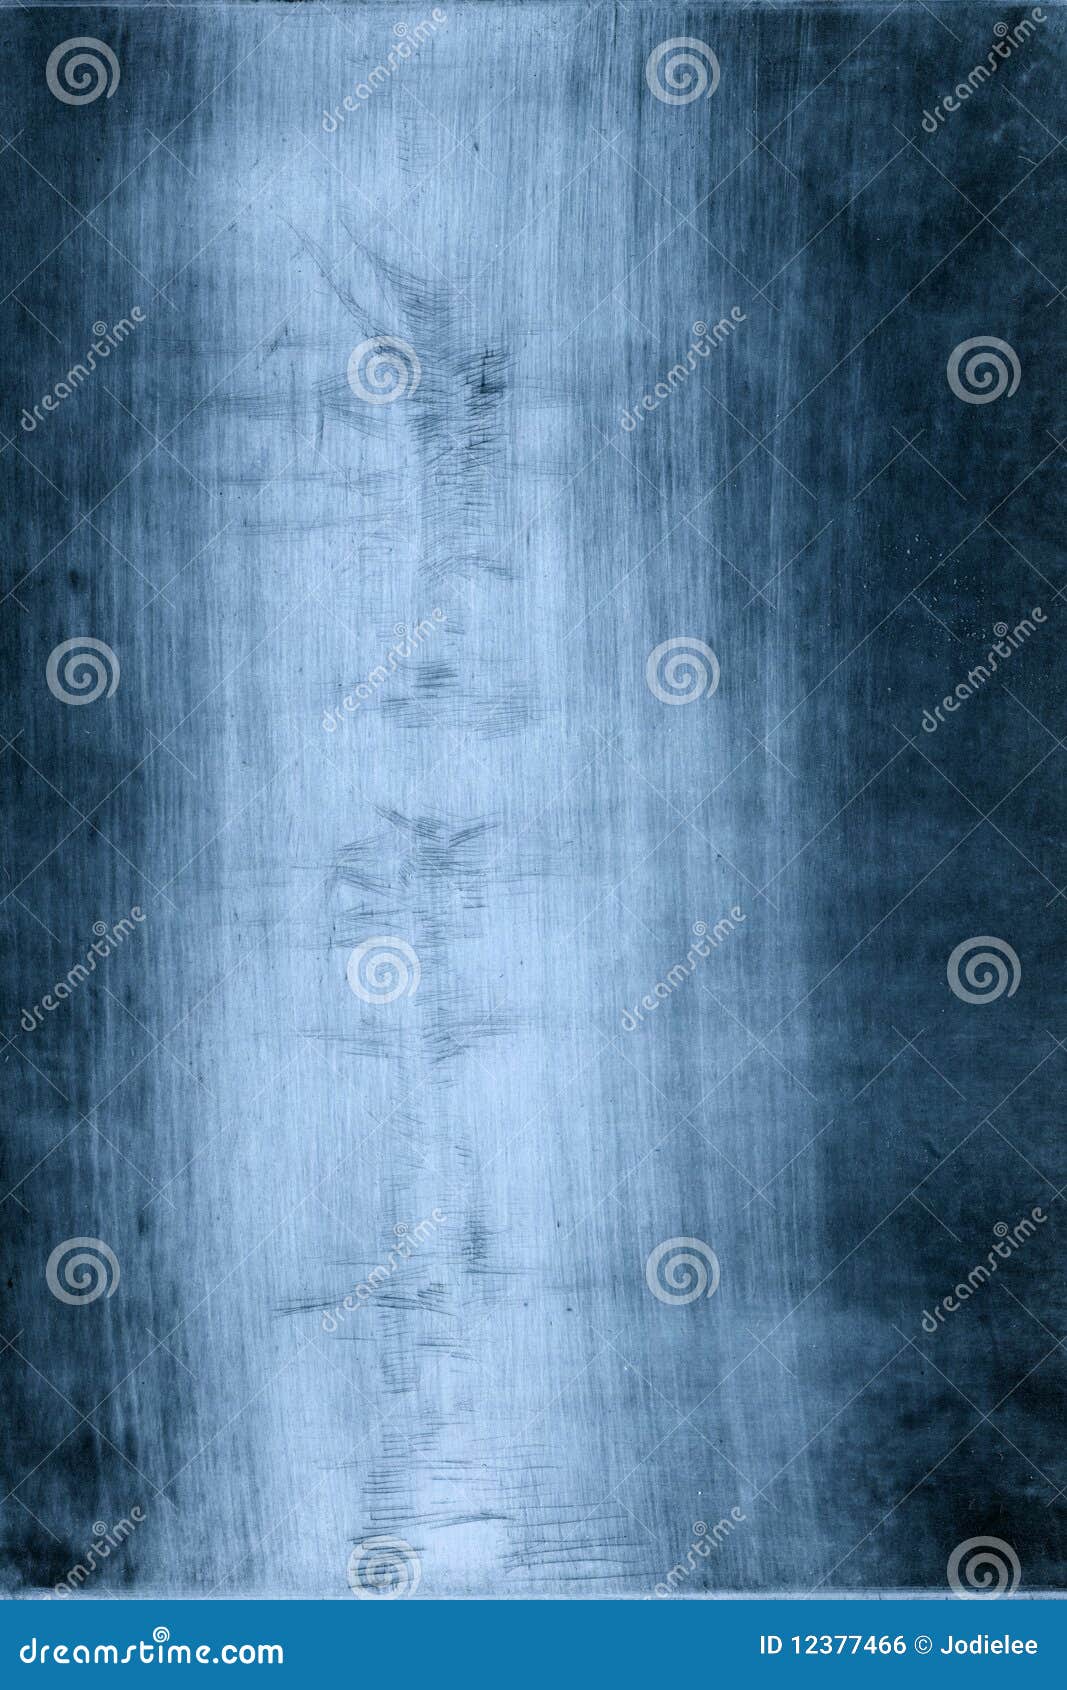 professional photo texture background in blue